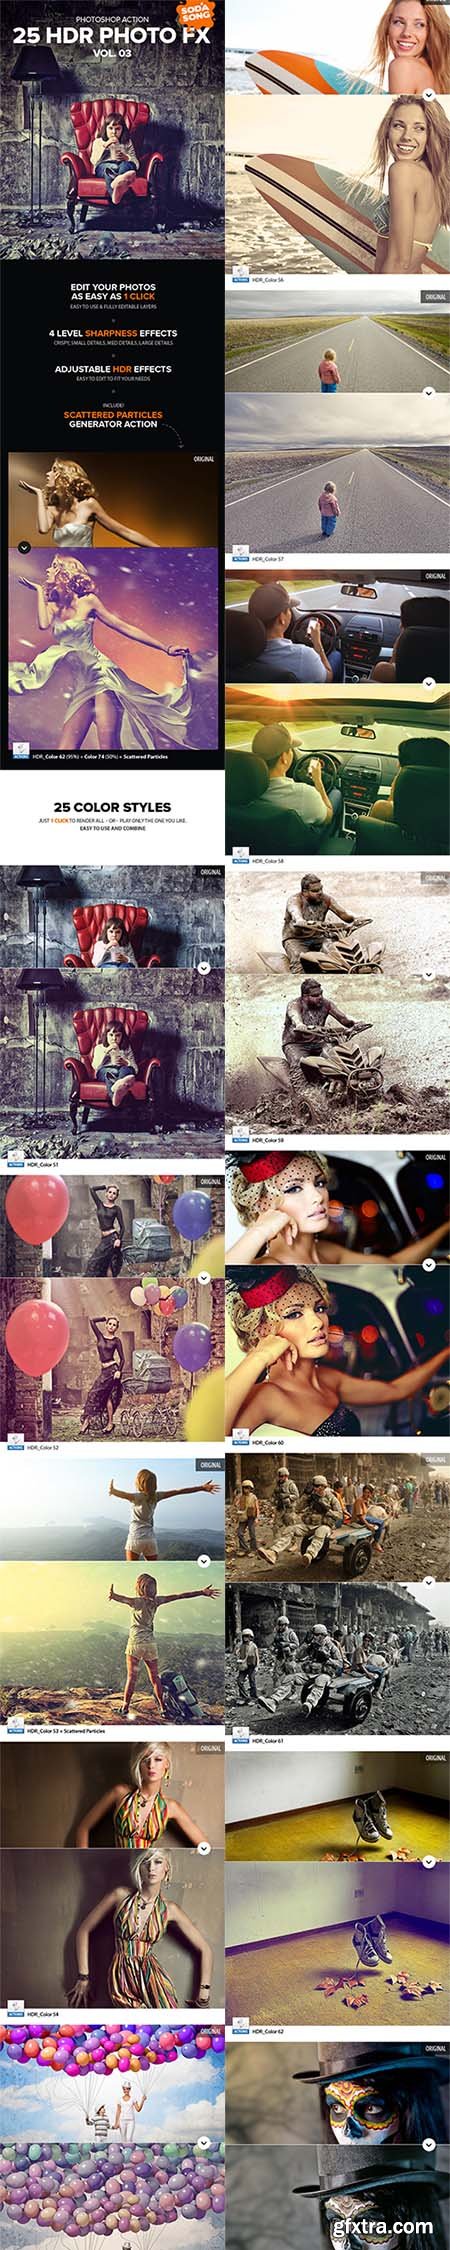 GraphicRiver - 25 HDR Photo FX V.3 - Photoshop Action 10126774